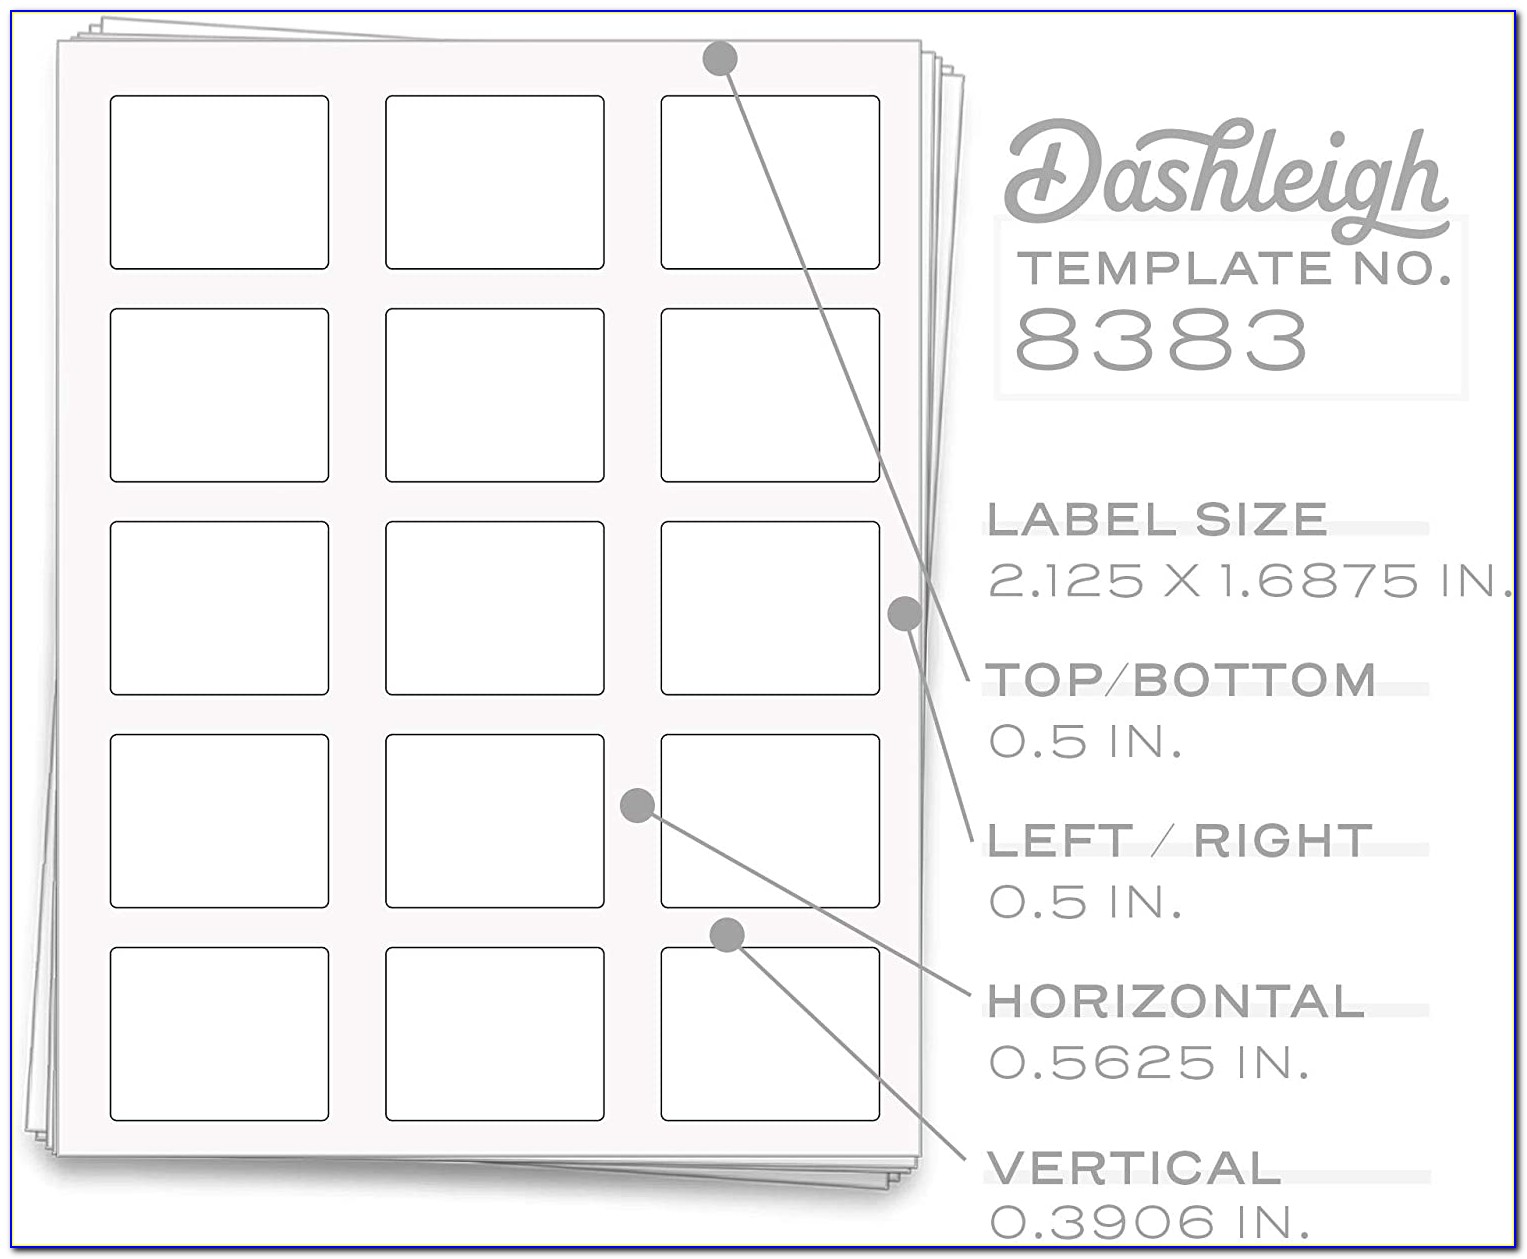 2125 X 16875 Label Template